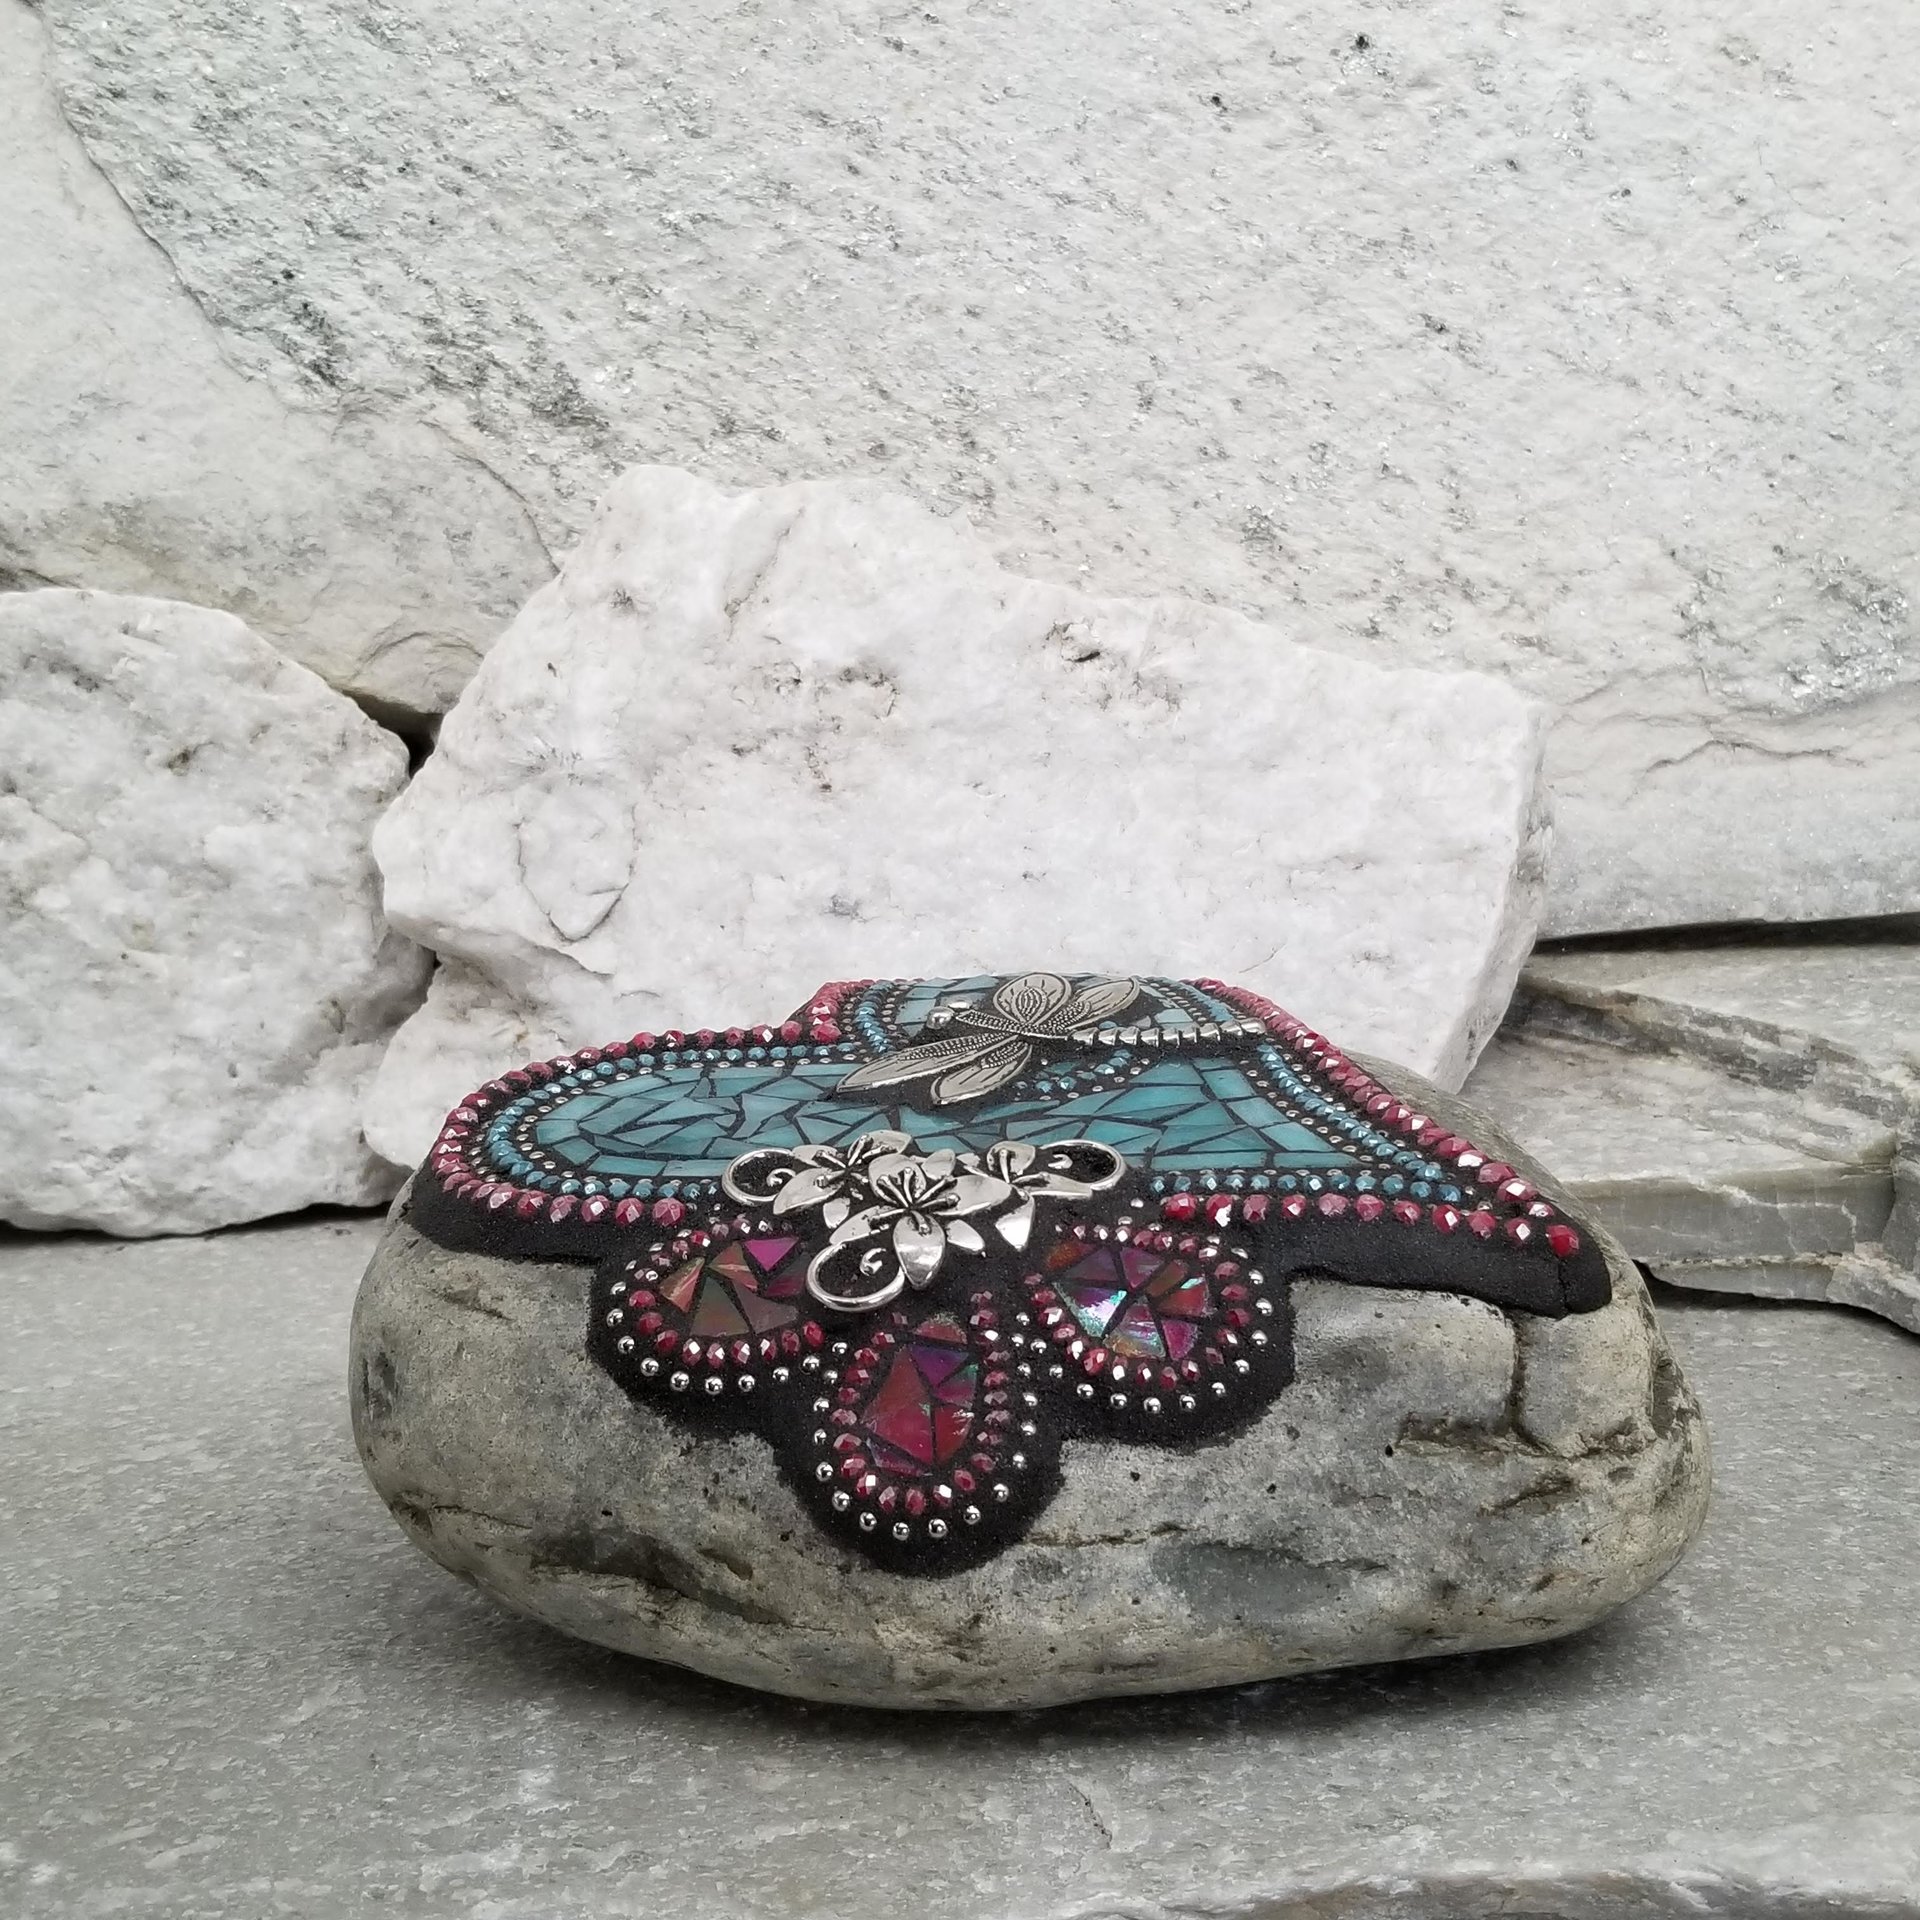 Turquoise and Red Dragonfly Mosaic Heart, Mosaic Rock, Mosaic Garden Stone,